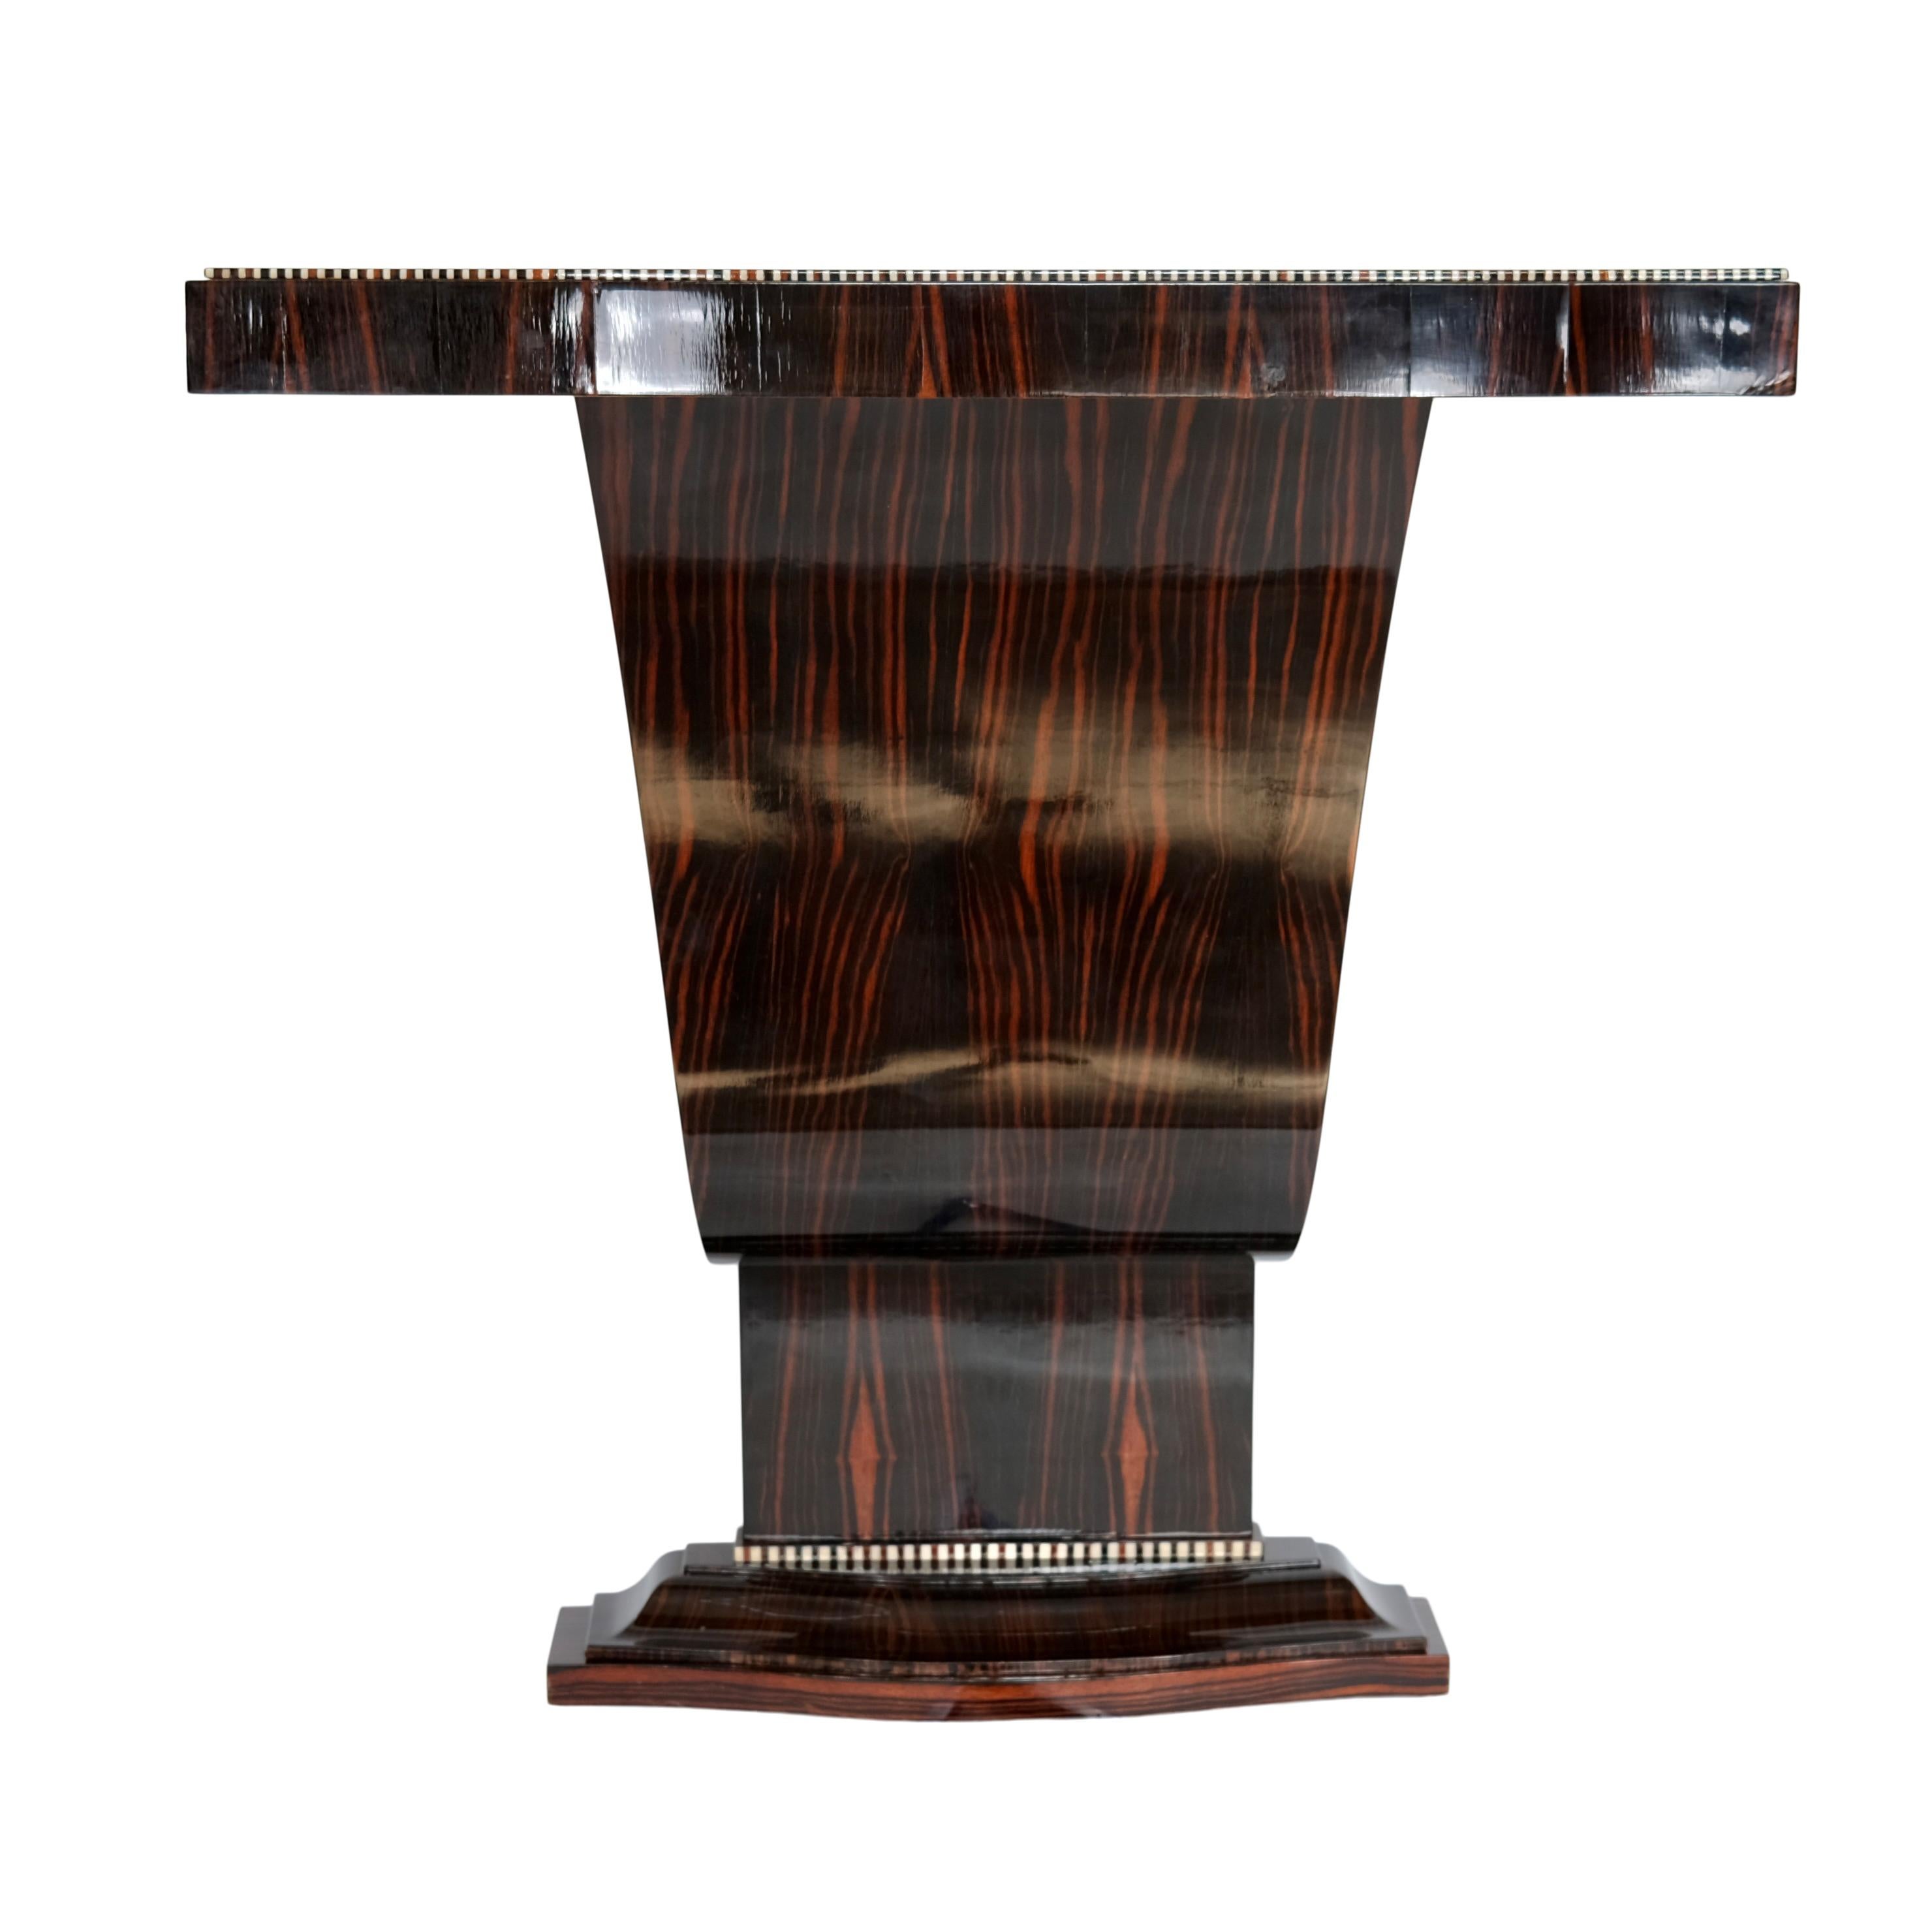 Lacquered 1930s French Art Deco Console Table in Macassar and Two-Tone Inlays For Sale